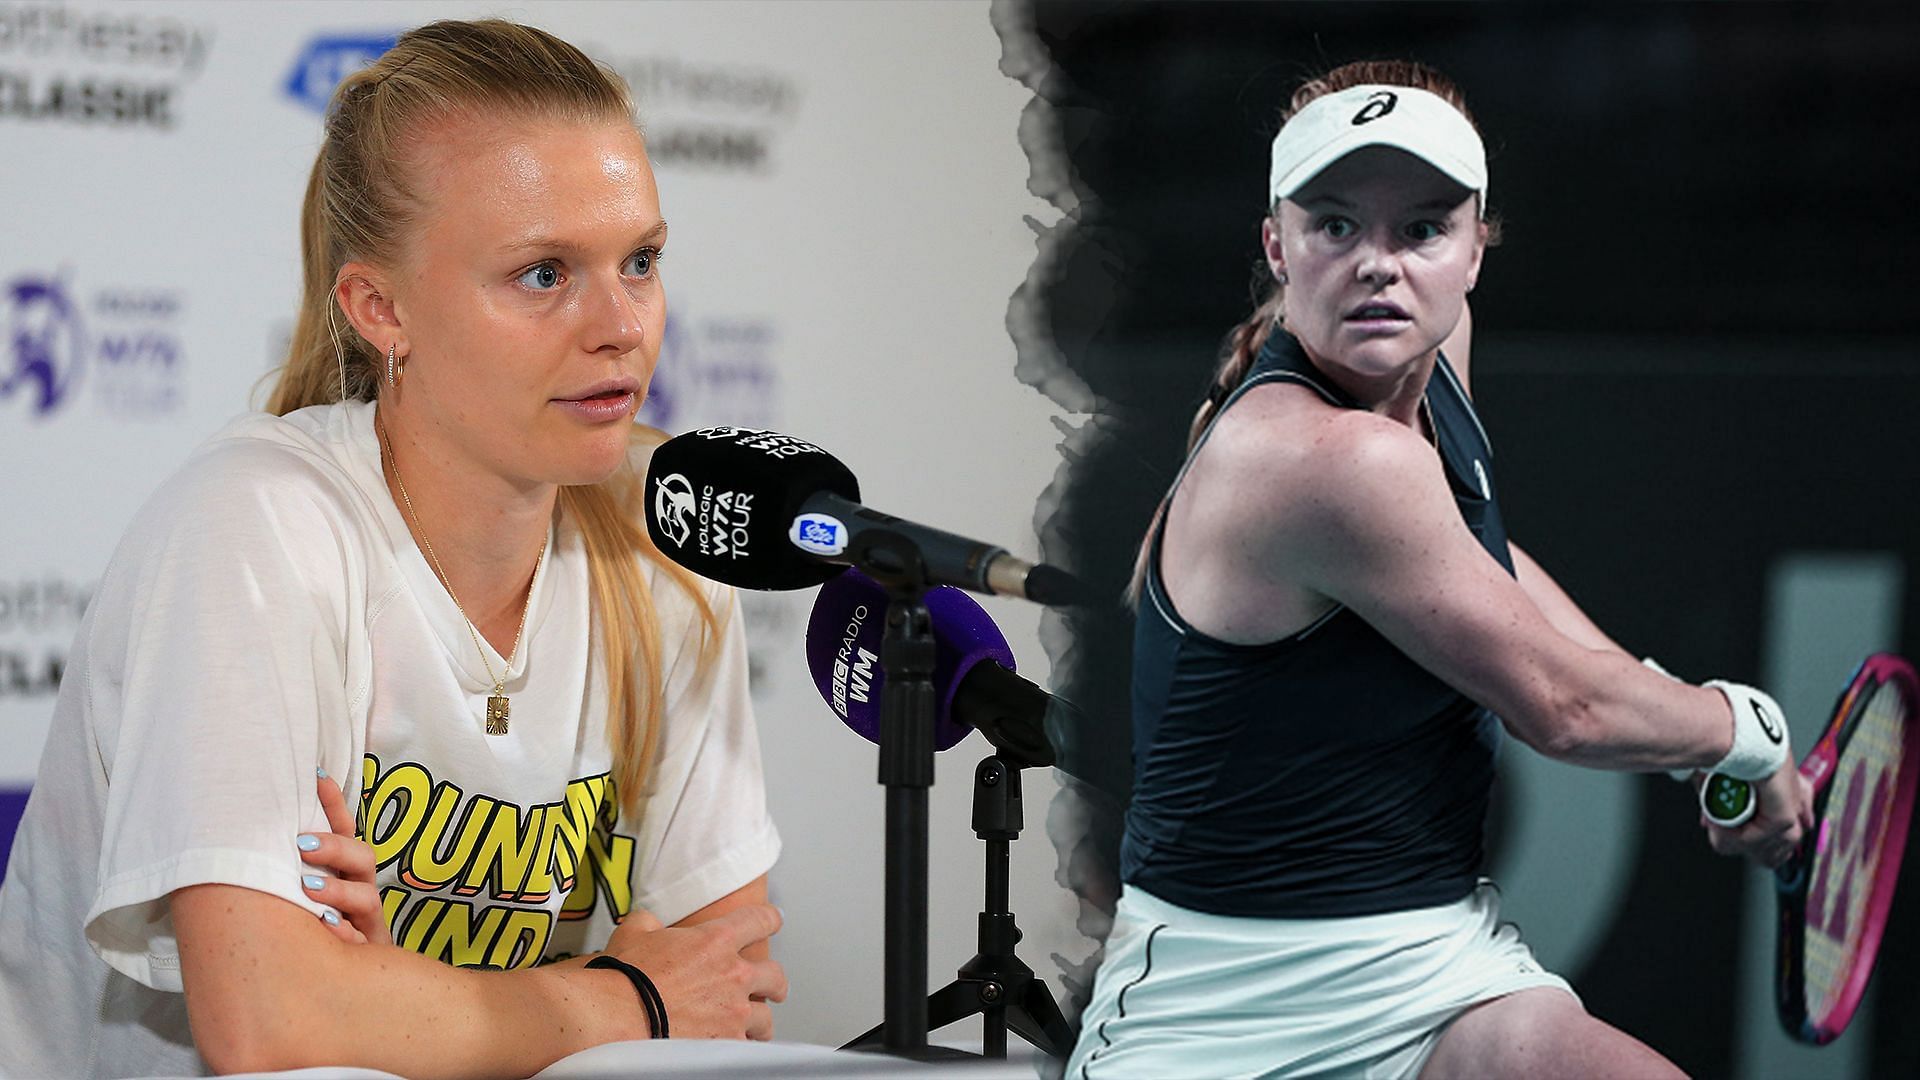 Harriet Dart condemns online abuse directed at her after Italian Open qualifiers defeat